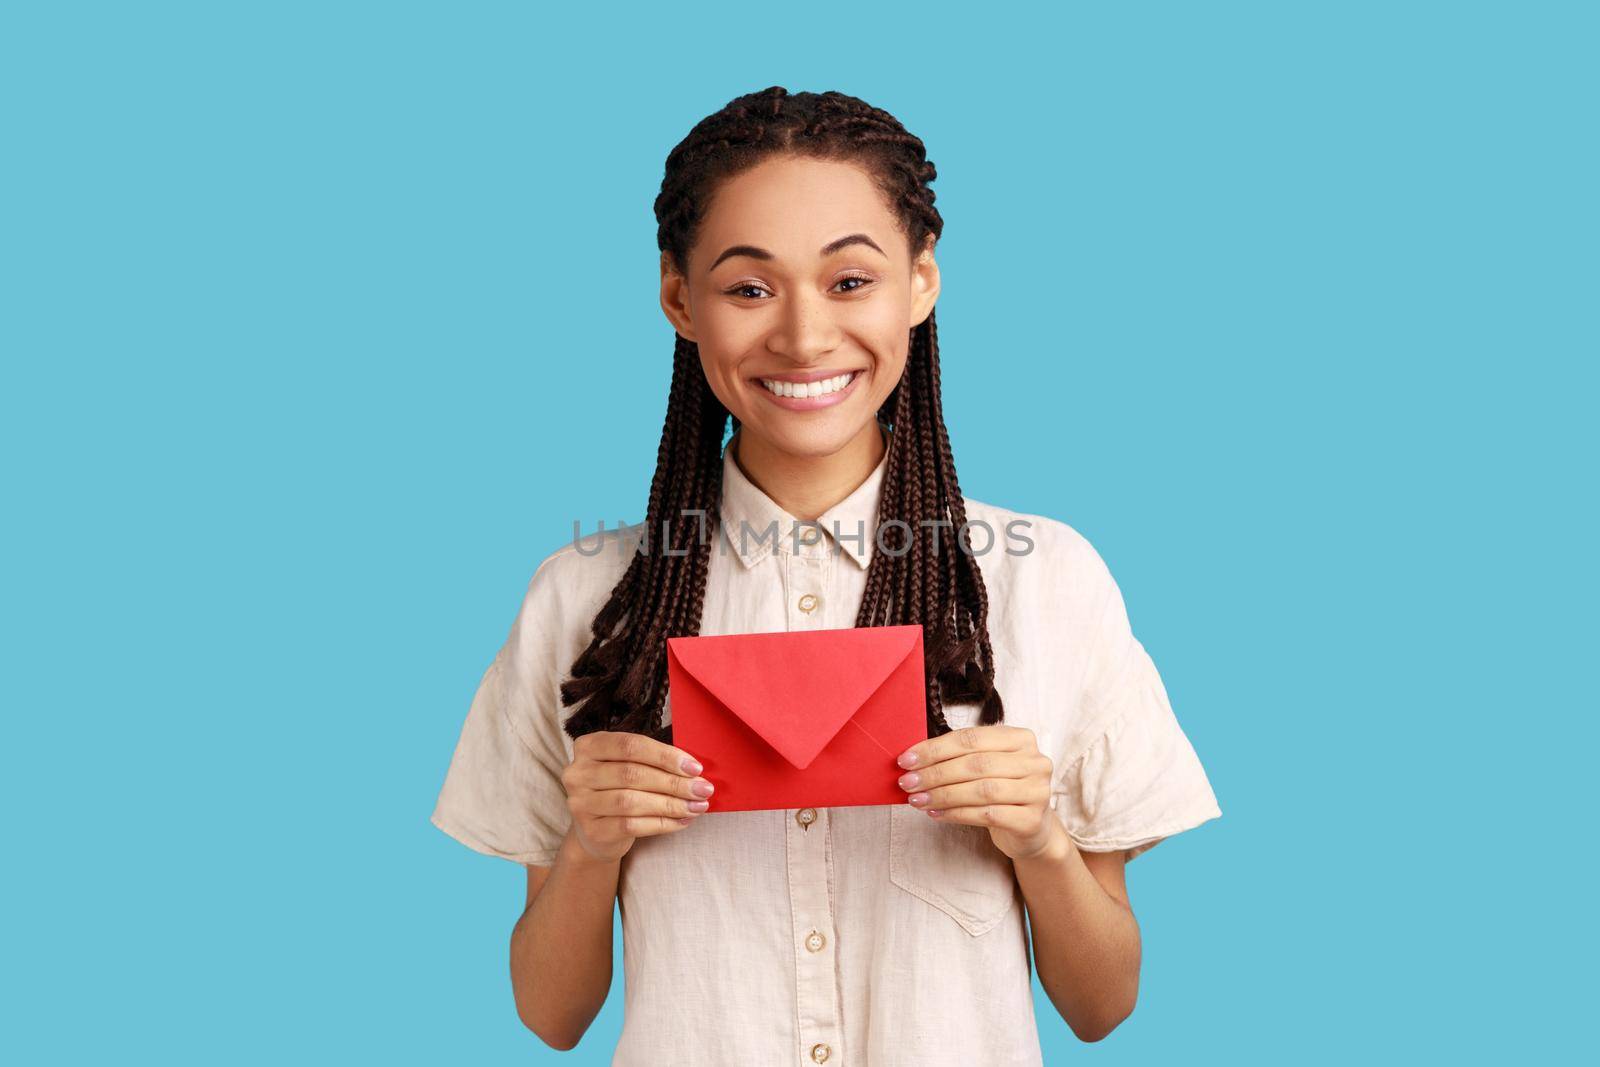 Beautiful woman with dreadlocks holding letter in red envelope or greeting card and smiling joyfully by Khosro1